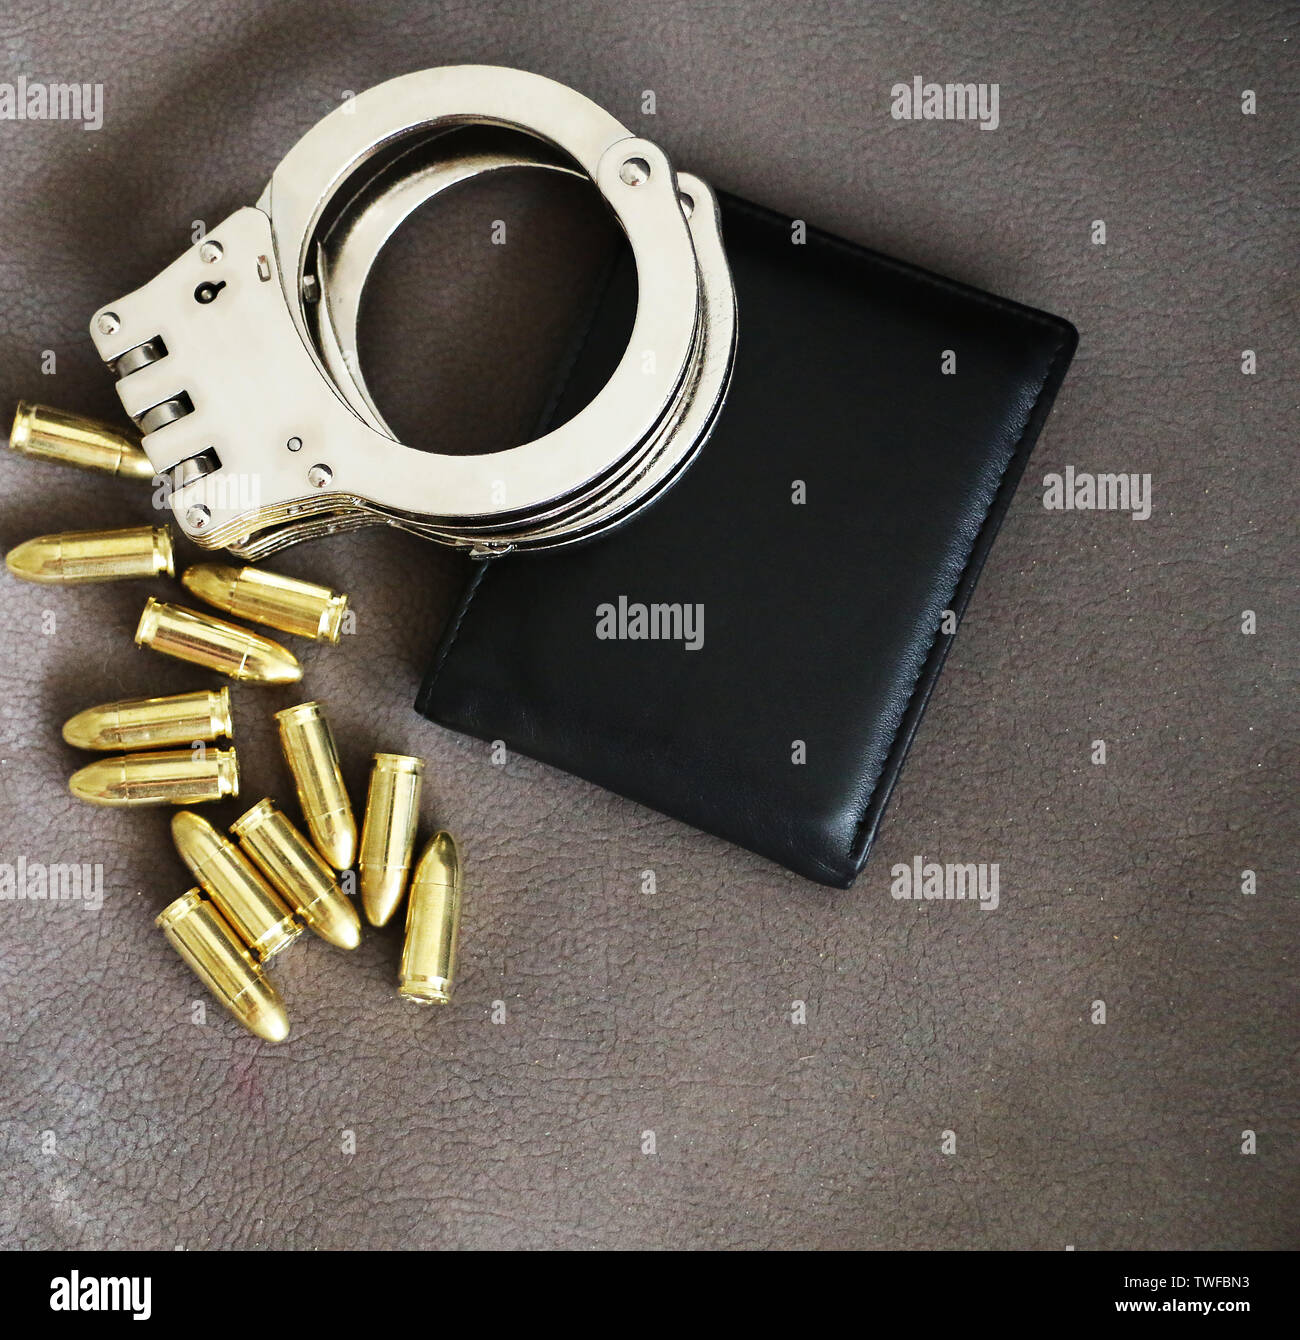 Handcuffs, pistol bullets and ID holder for cops, special forces and defense units equipment. Close up background. Stock Photo